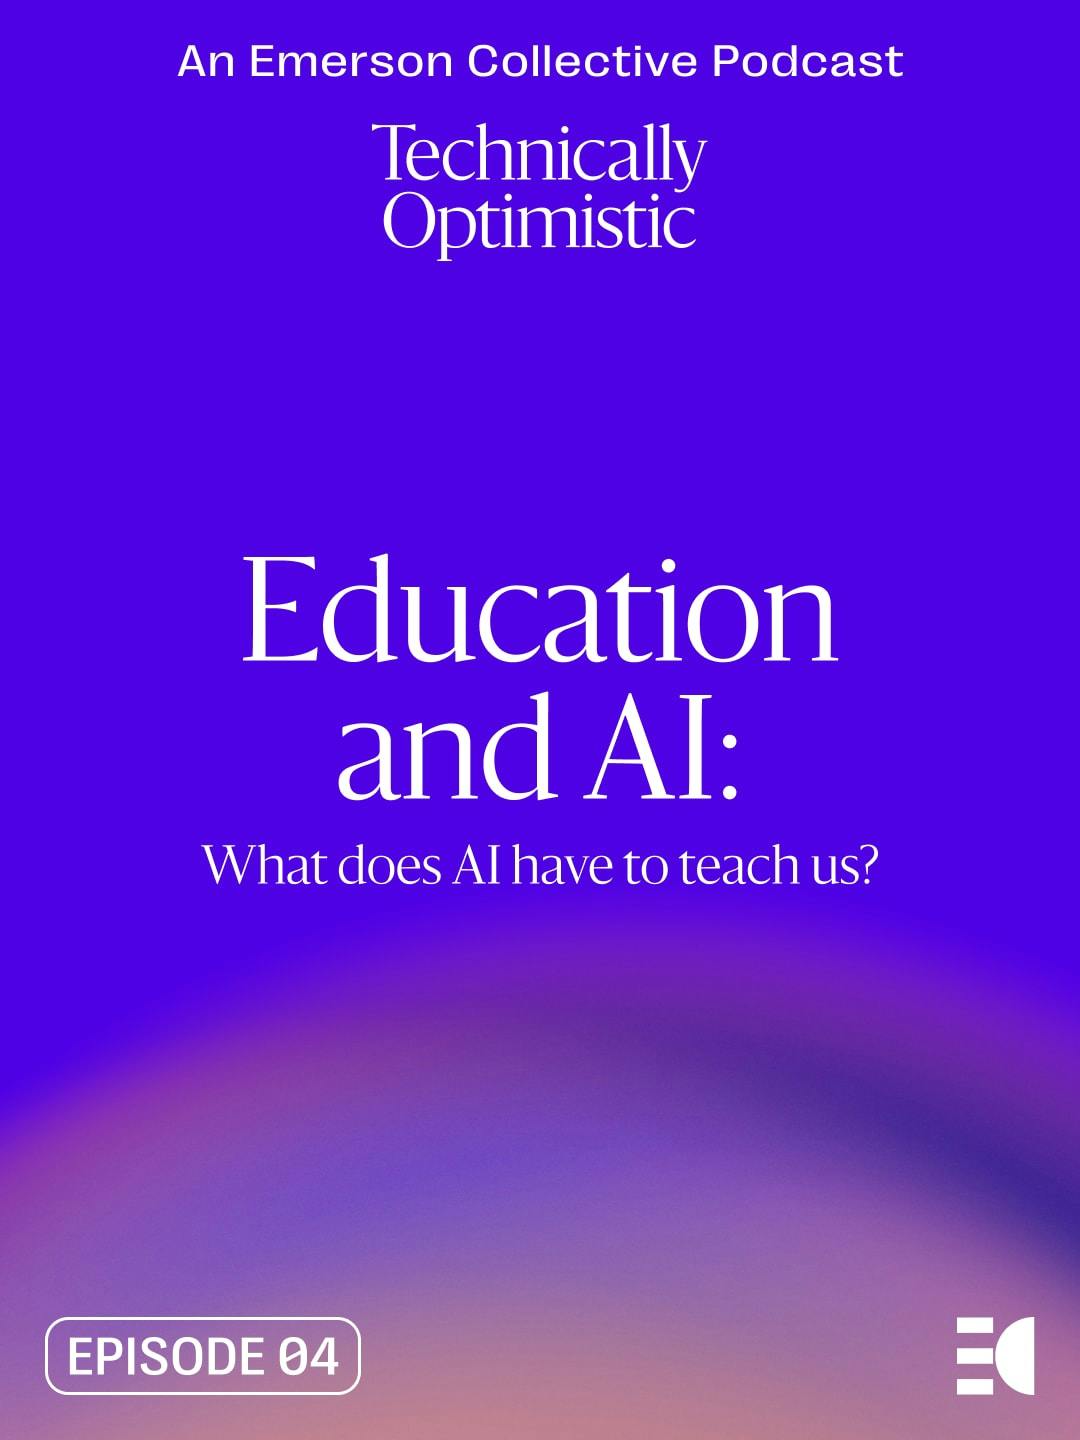 Education and AI: What does AI have to teach us?